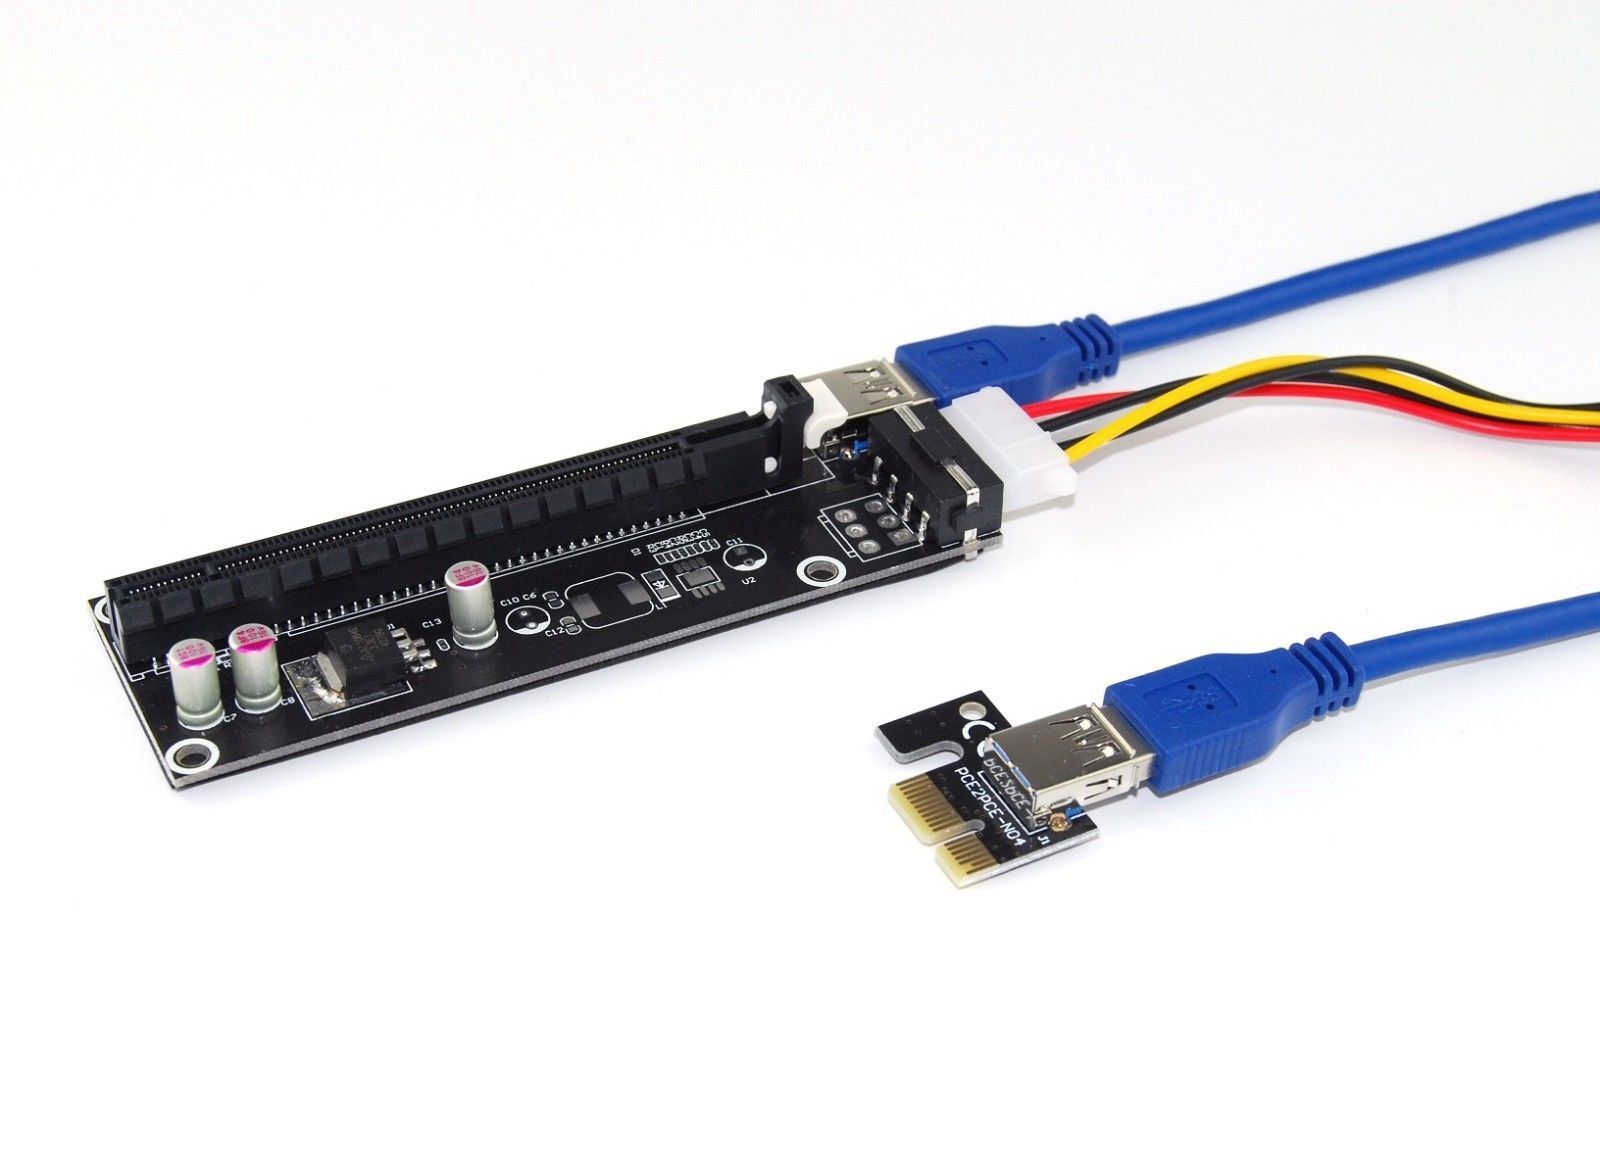 New PCIe PCI-E x1 to x16 Riser Card USB3.0 Extender Cable External Powered 50cm